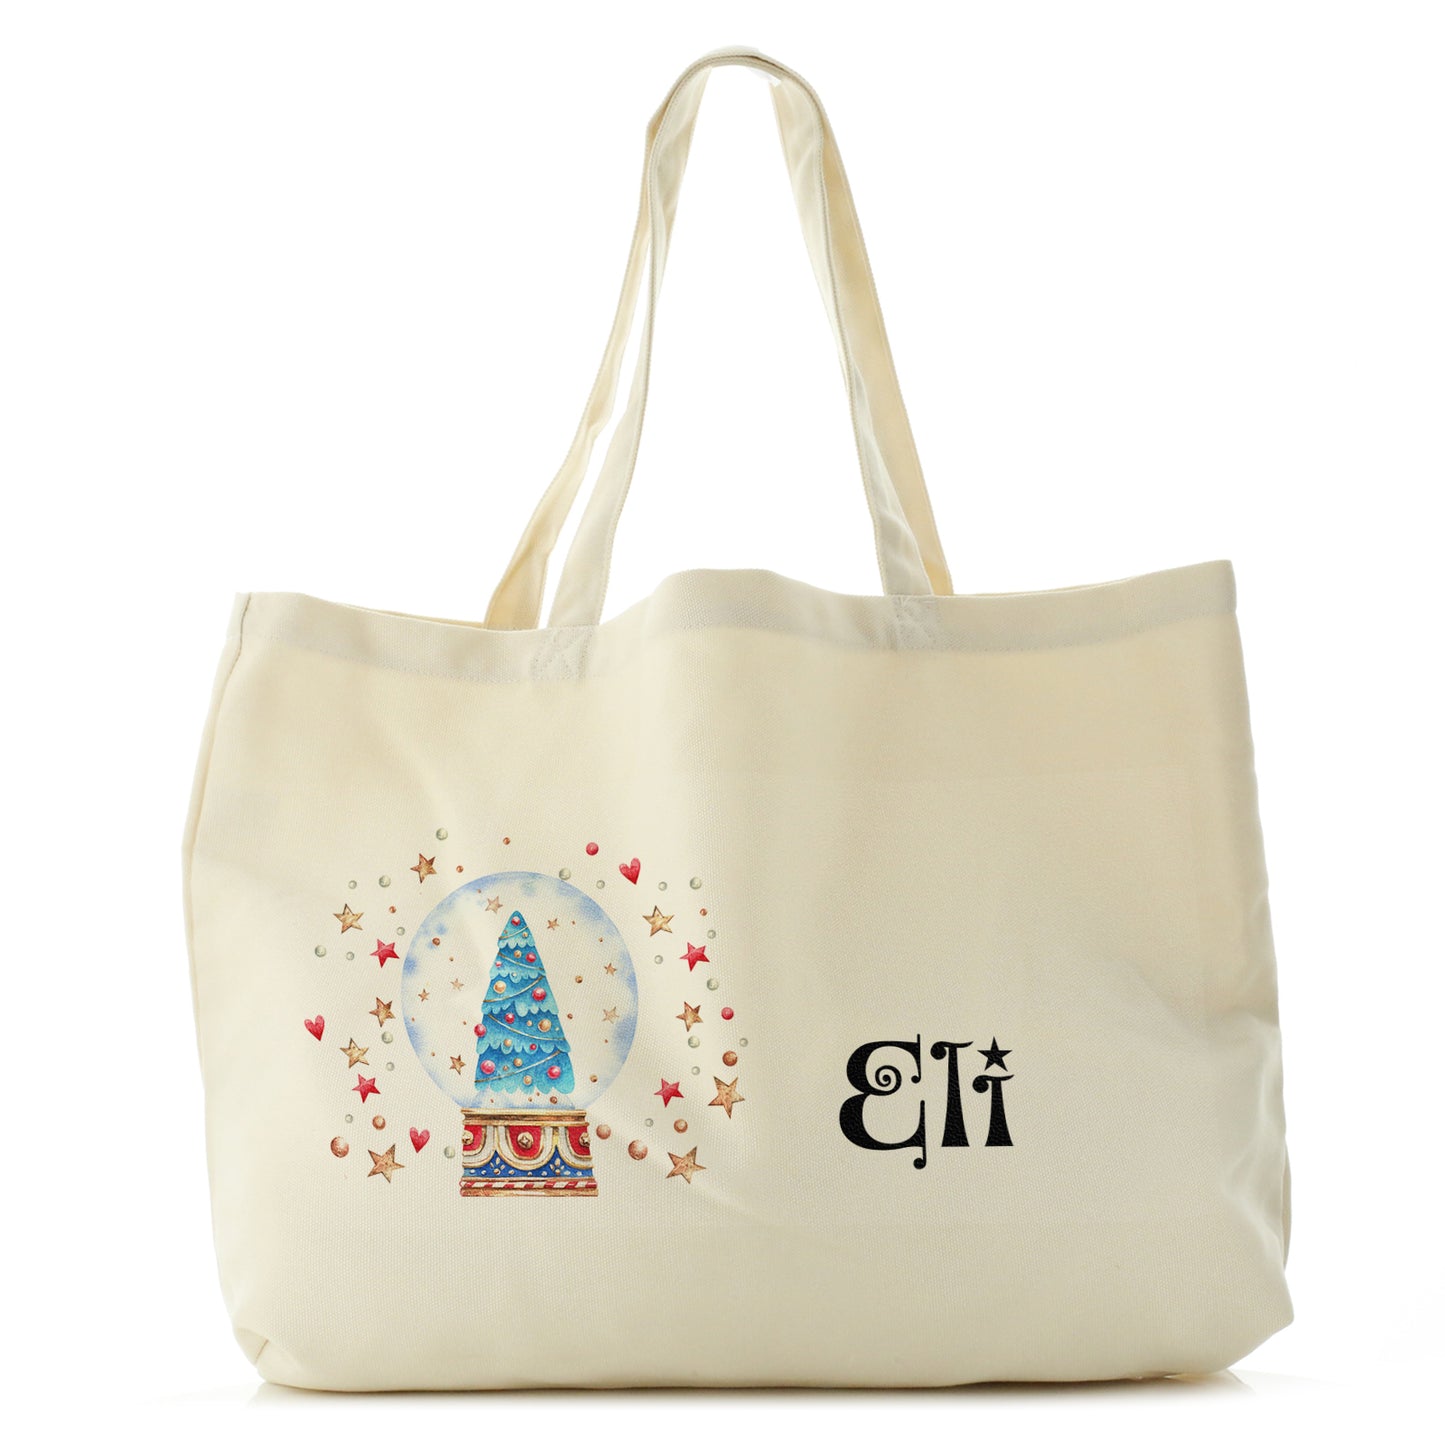 Personalised Canvas Tote Bag with Christmas Text and Blue Xmas Tree Snow Globe